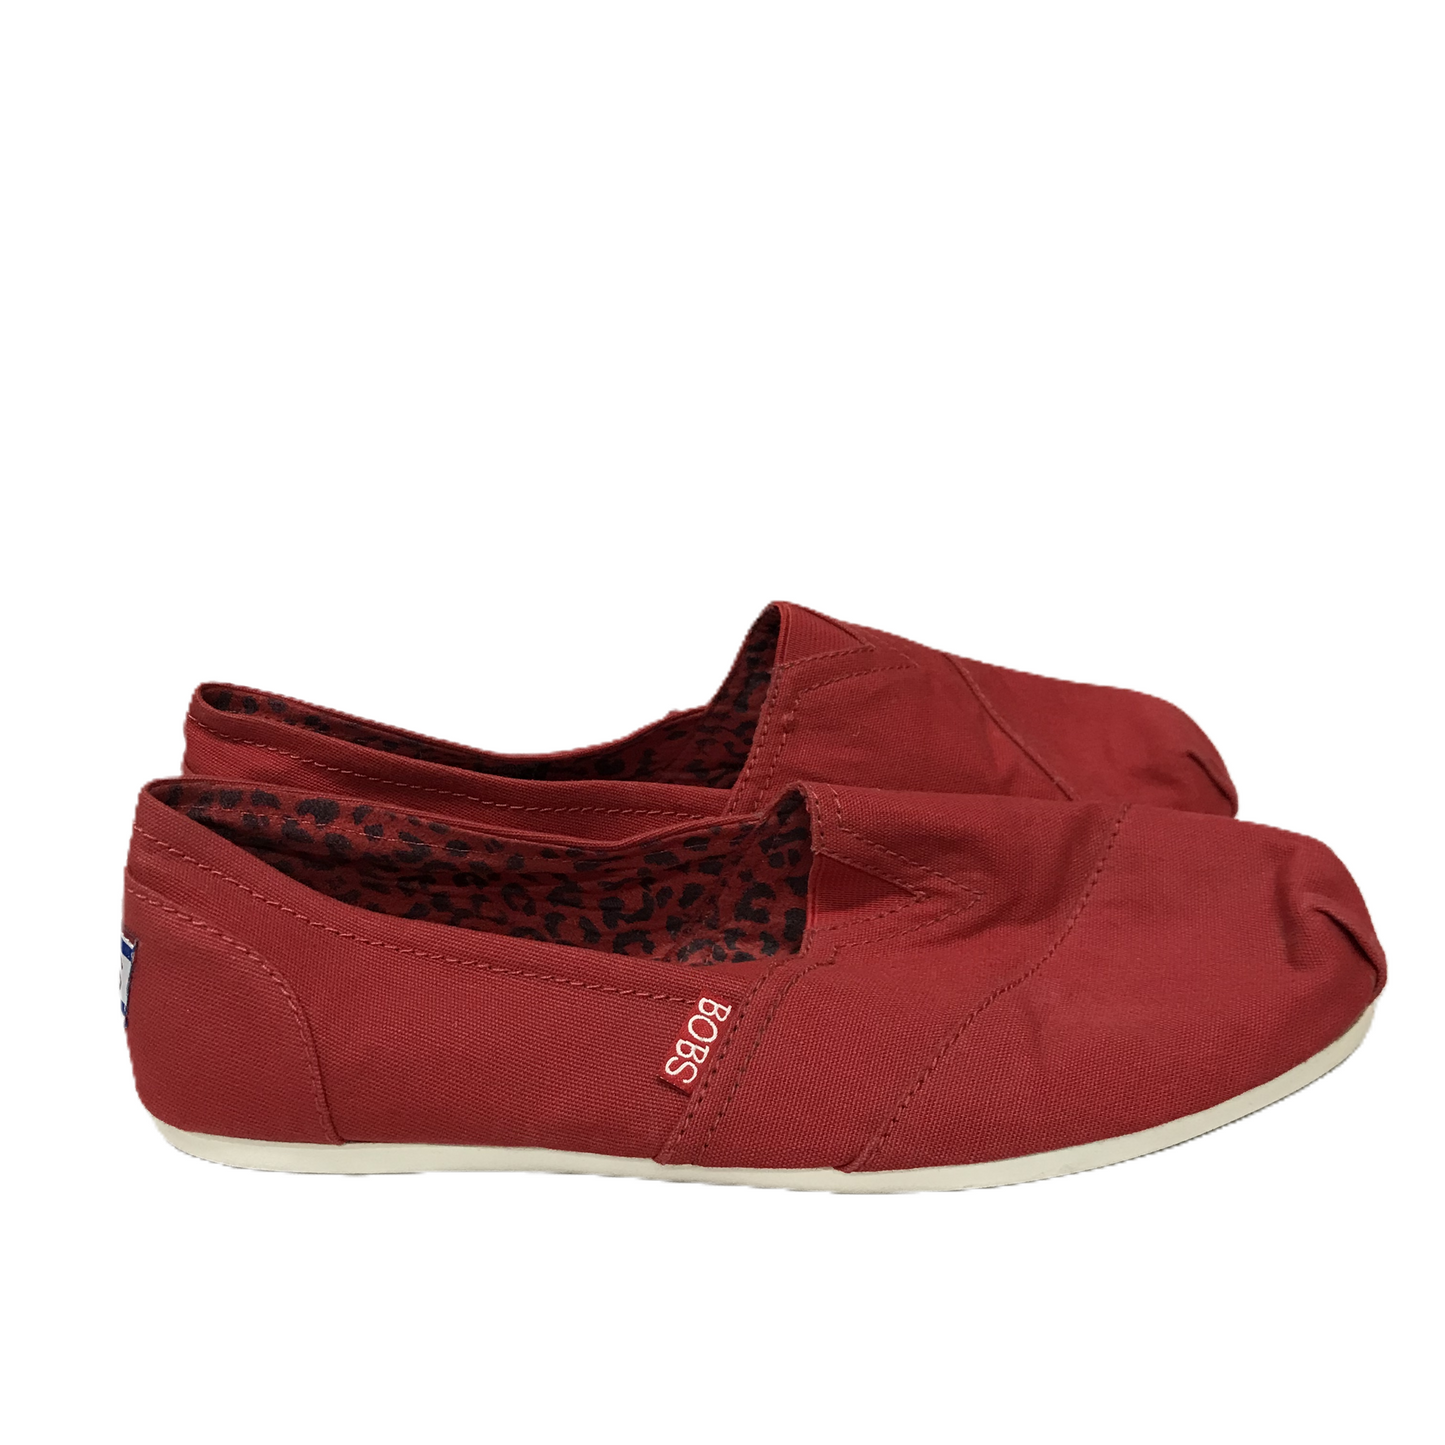 Red Shoes Flats By Bobs, Size: 9